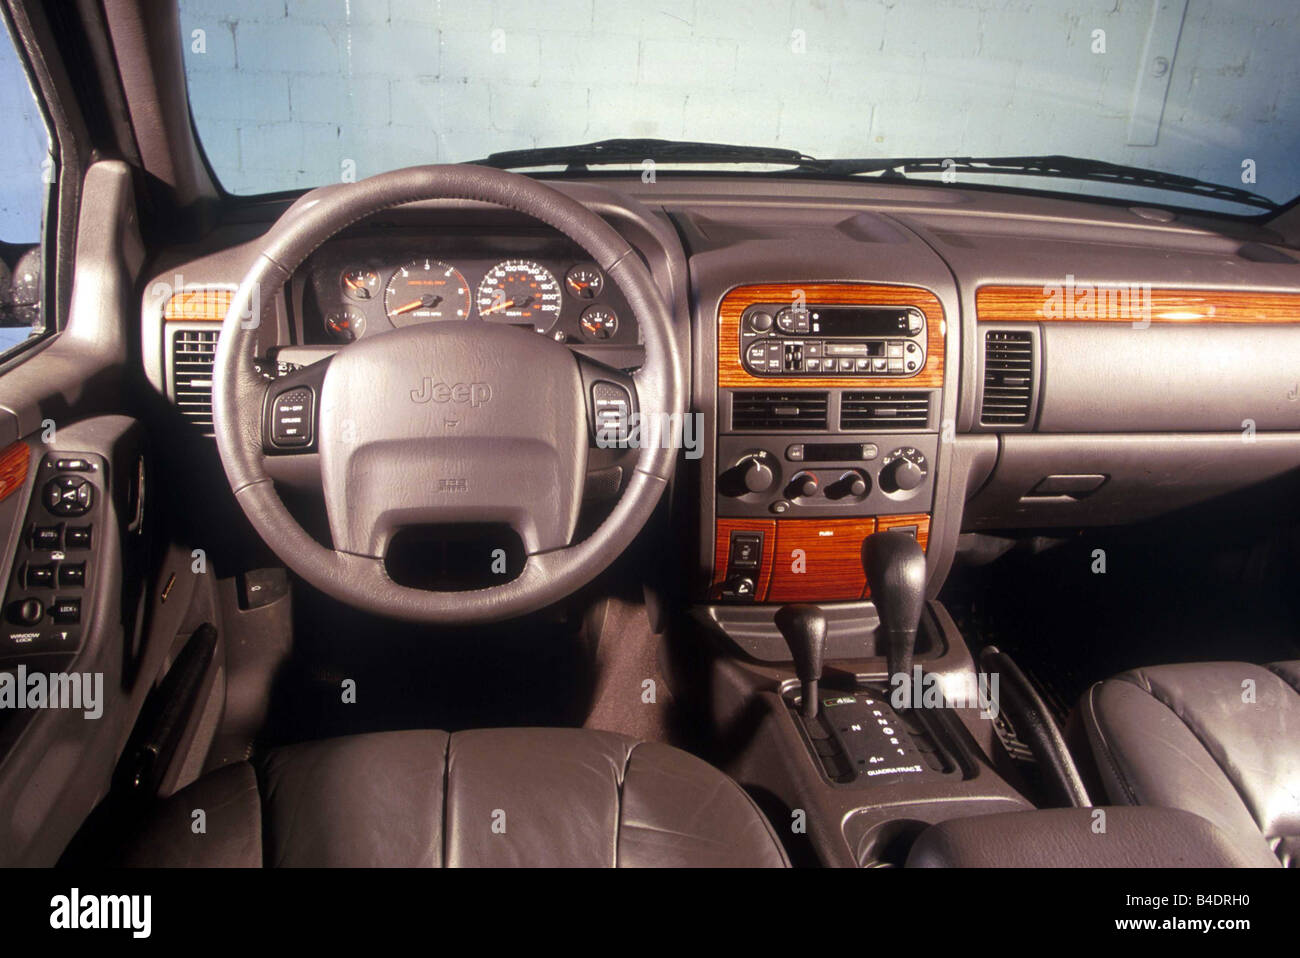 Car, Chrysler Jeep Grand Cherokee 3.1 TD, cross country vehicle, model year 1998-, black, interior view, Interior view, Cockpit, Stock Photo